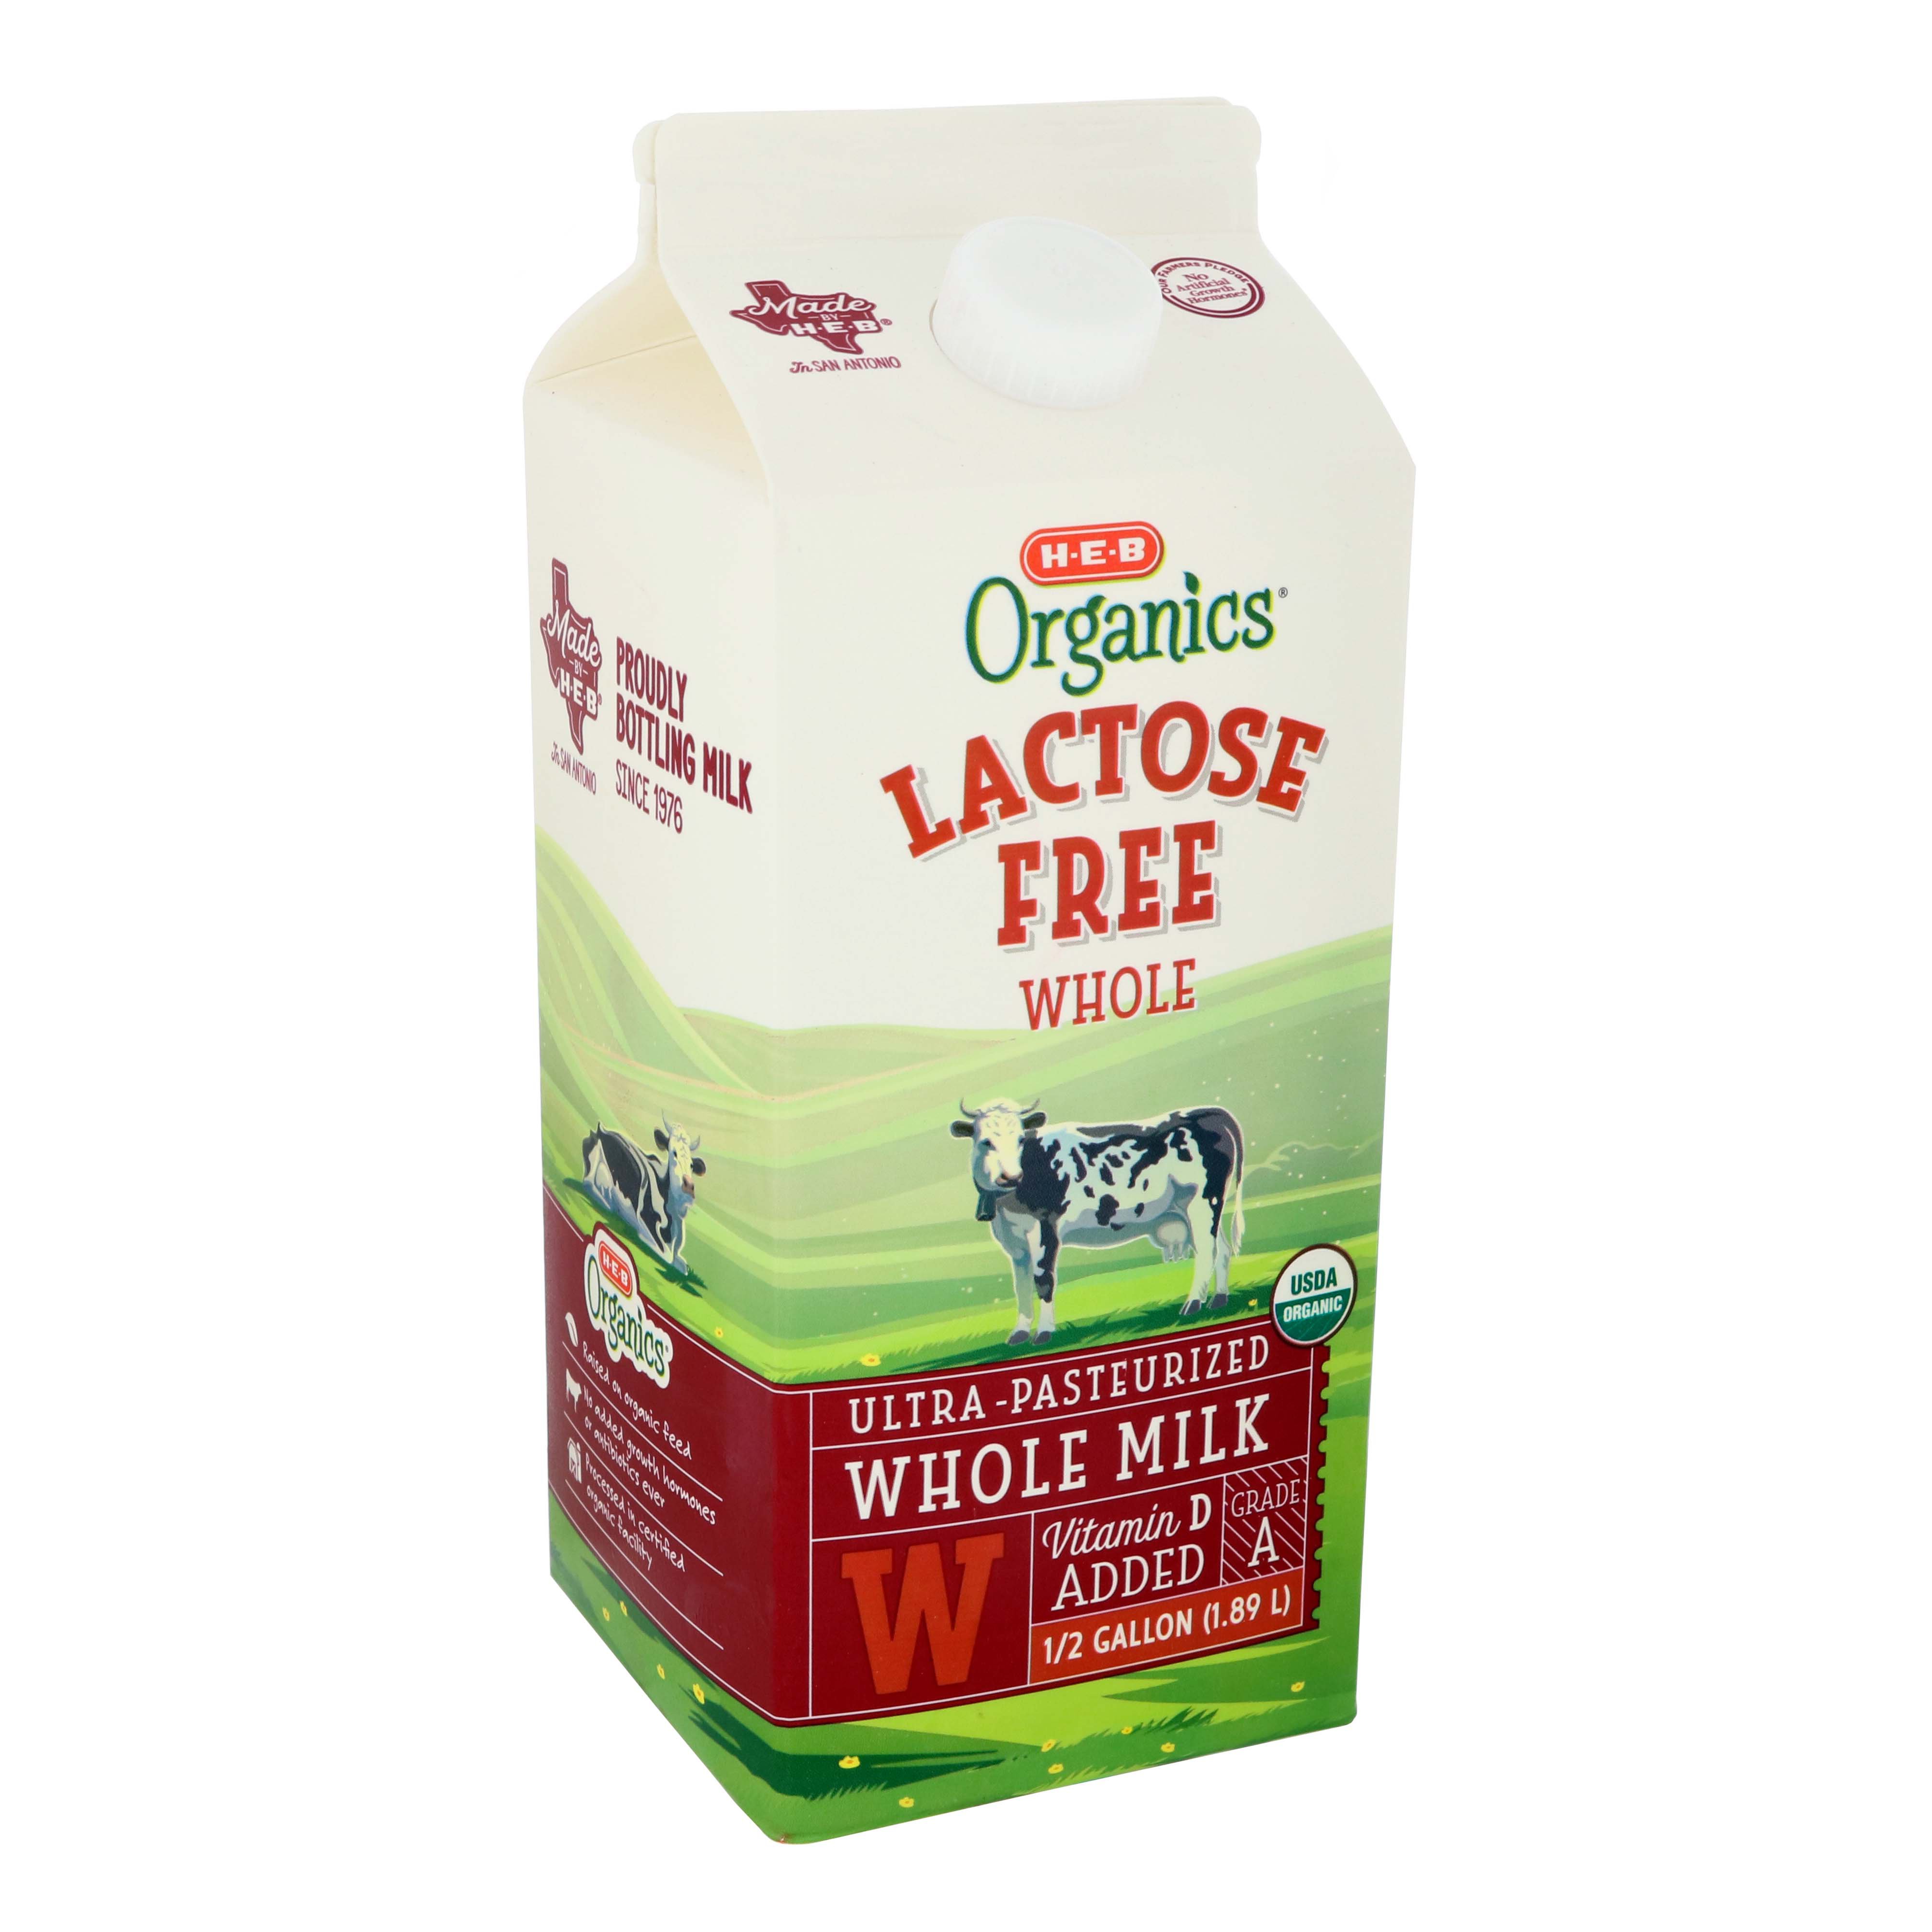 are dogs allowed lactose free milk